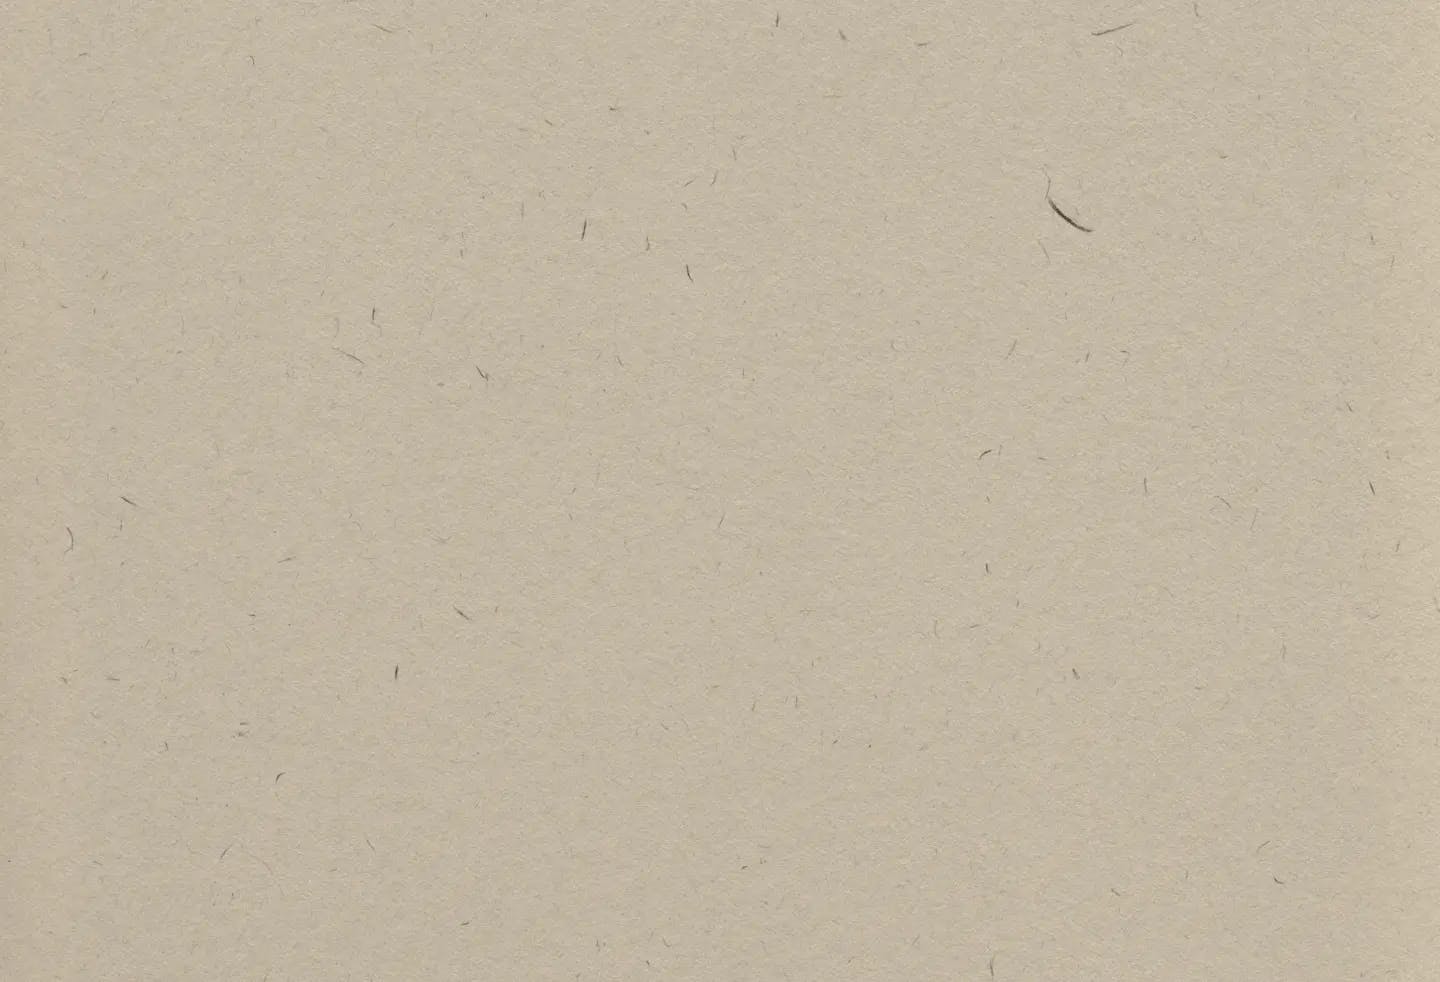 Background image of paper